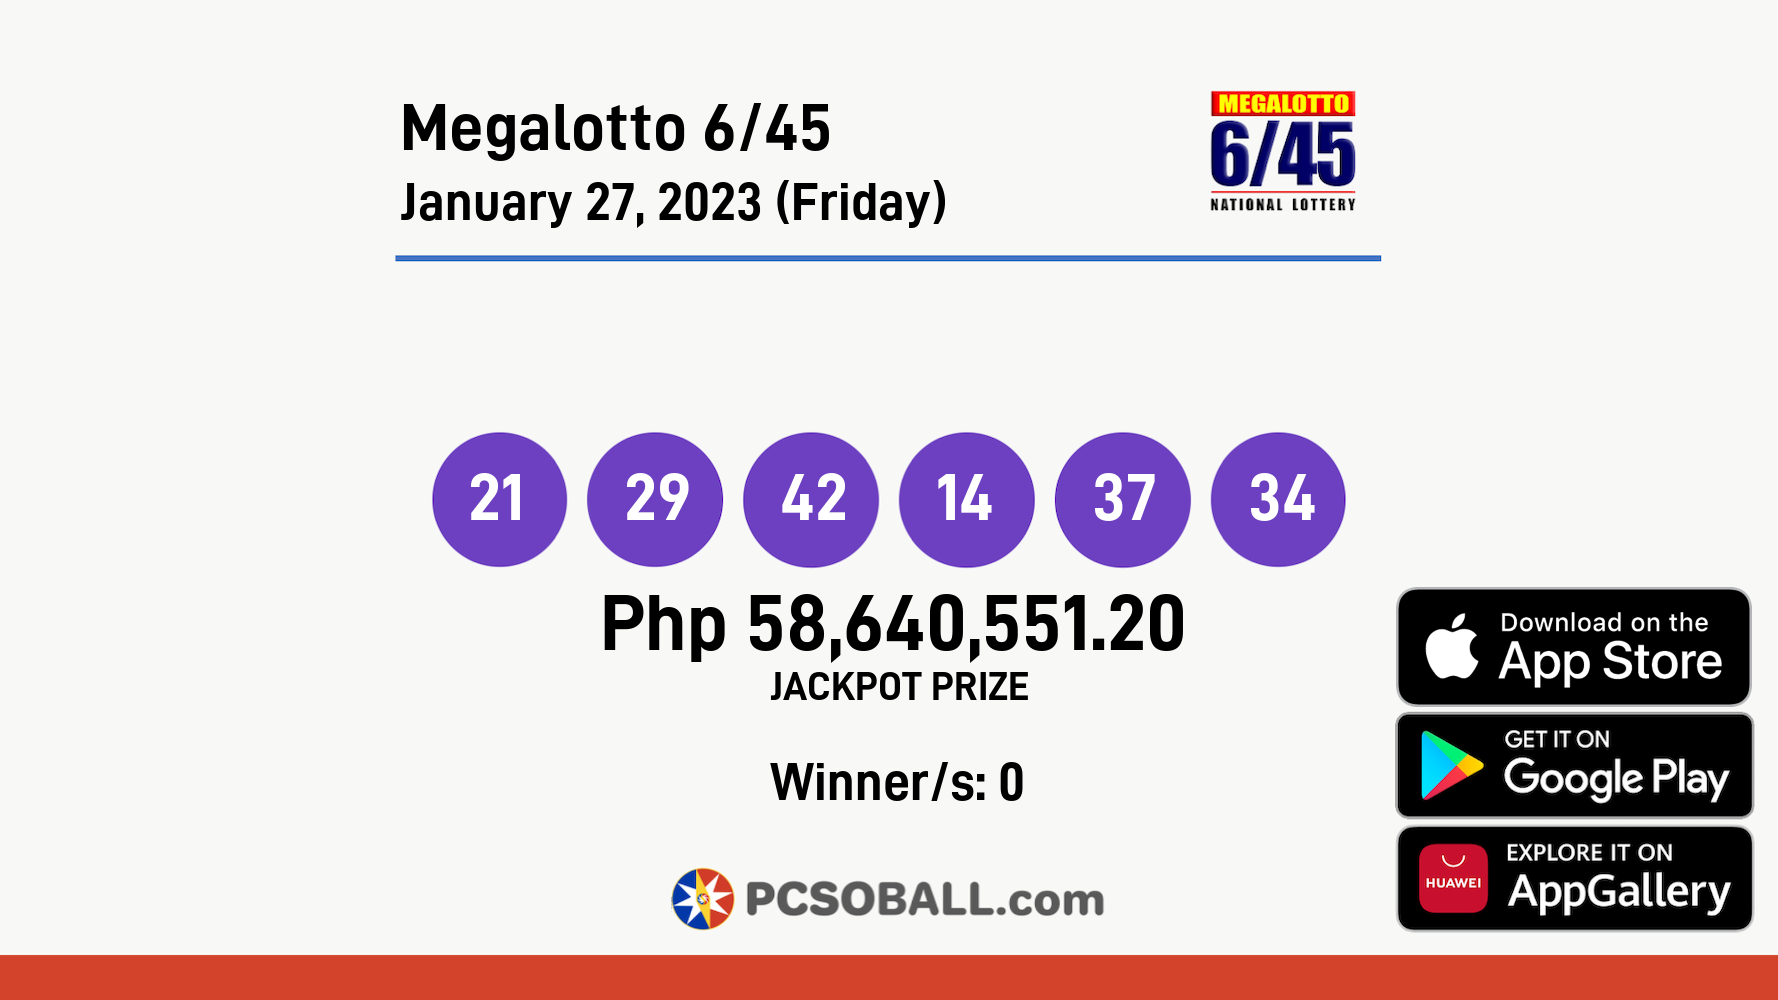 Megalotto 6/45 January 27, 2023 (Friday) Result